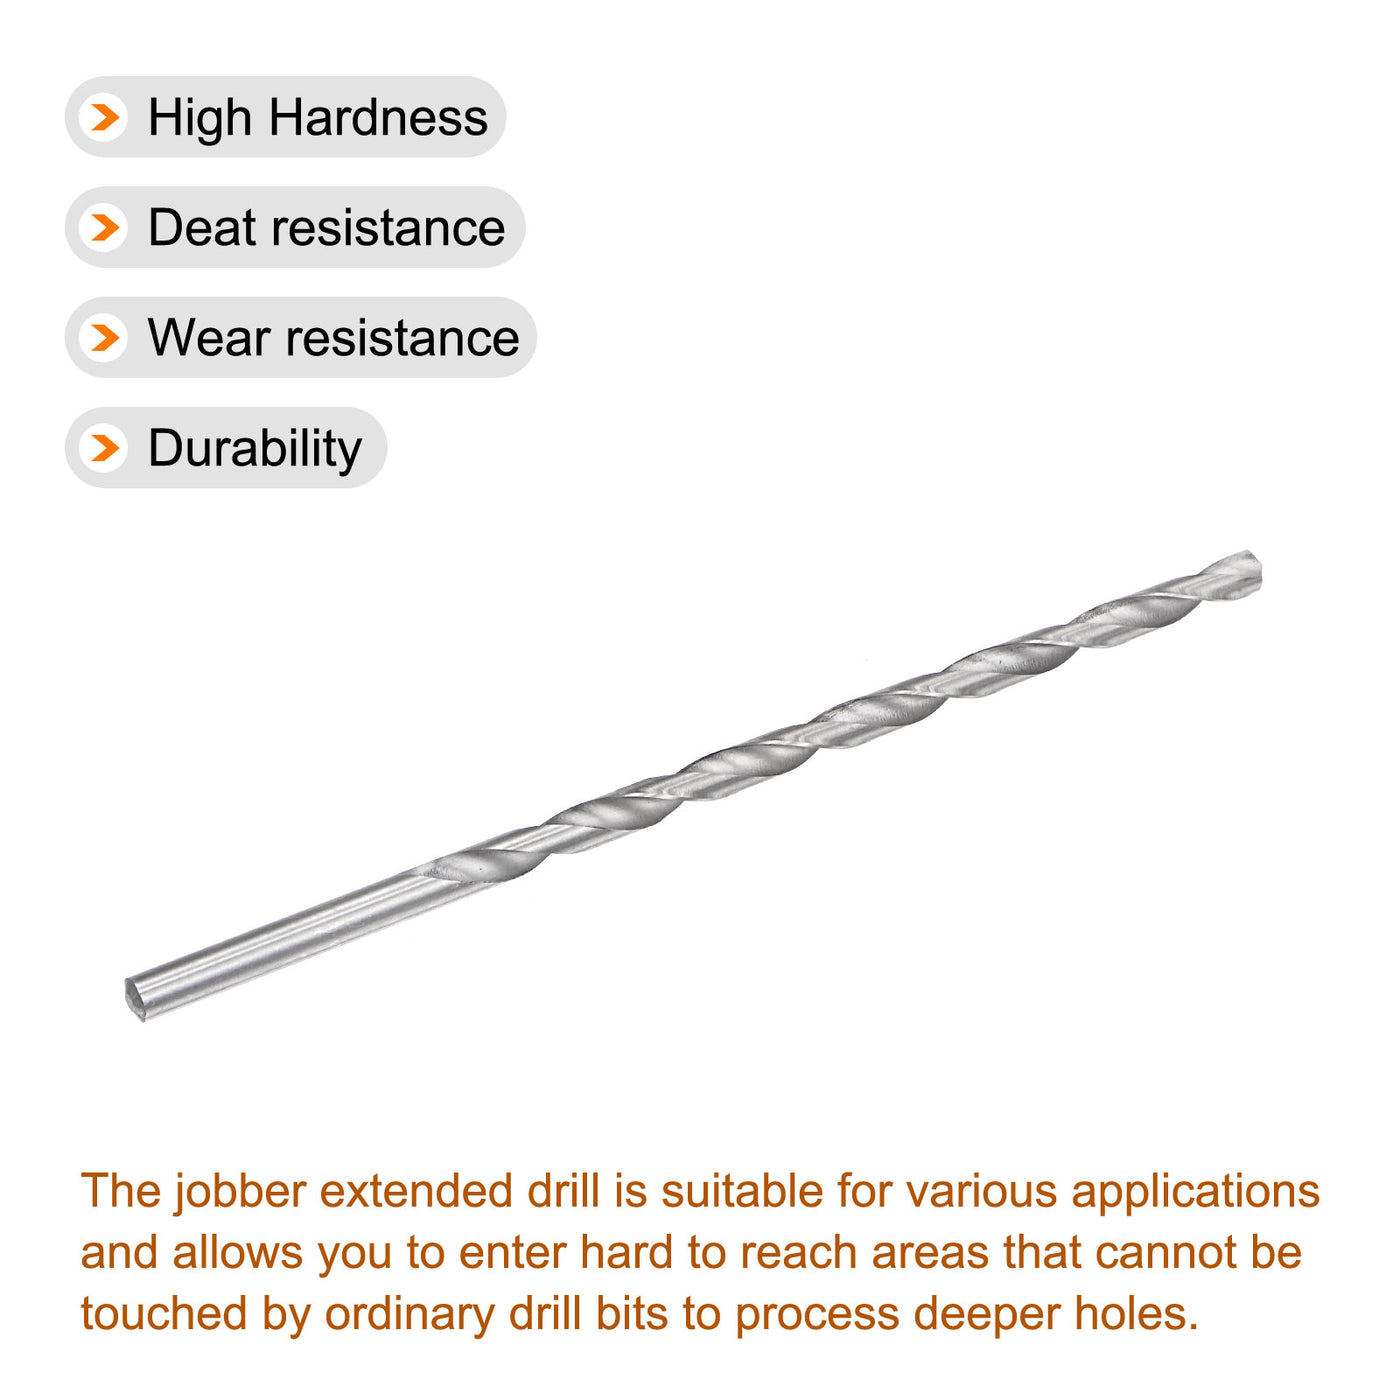 uxcell Uxcell 7.2mm Twist Drill Bits, High-Speed Steel Extra Long Drill Bit 200mm Length